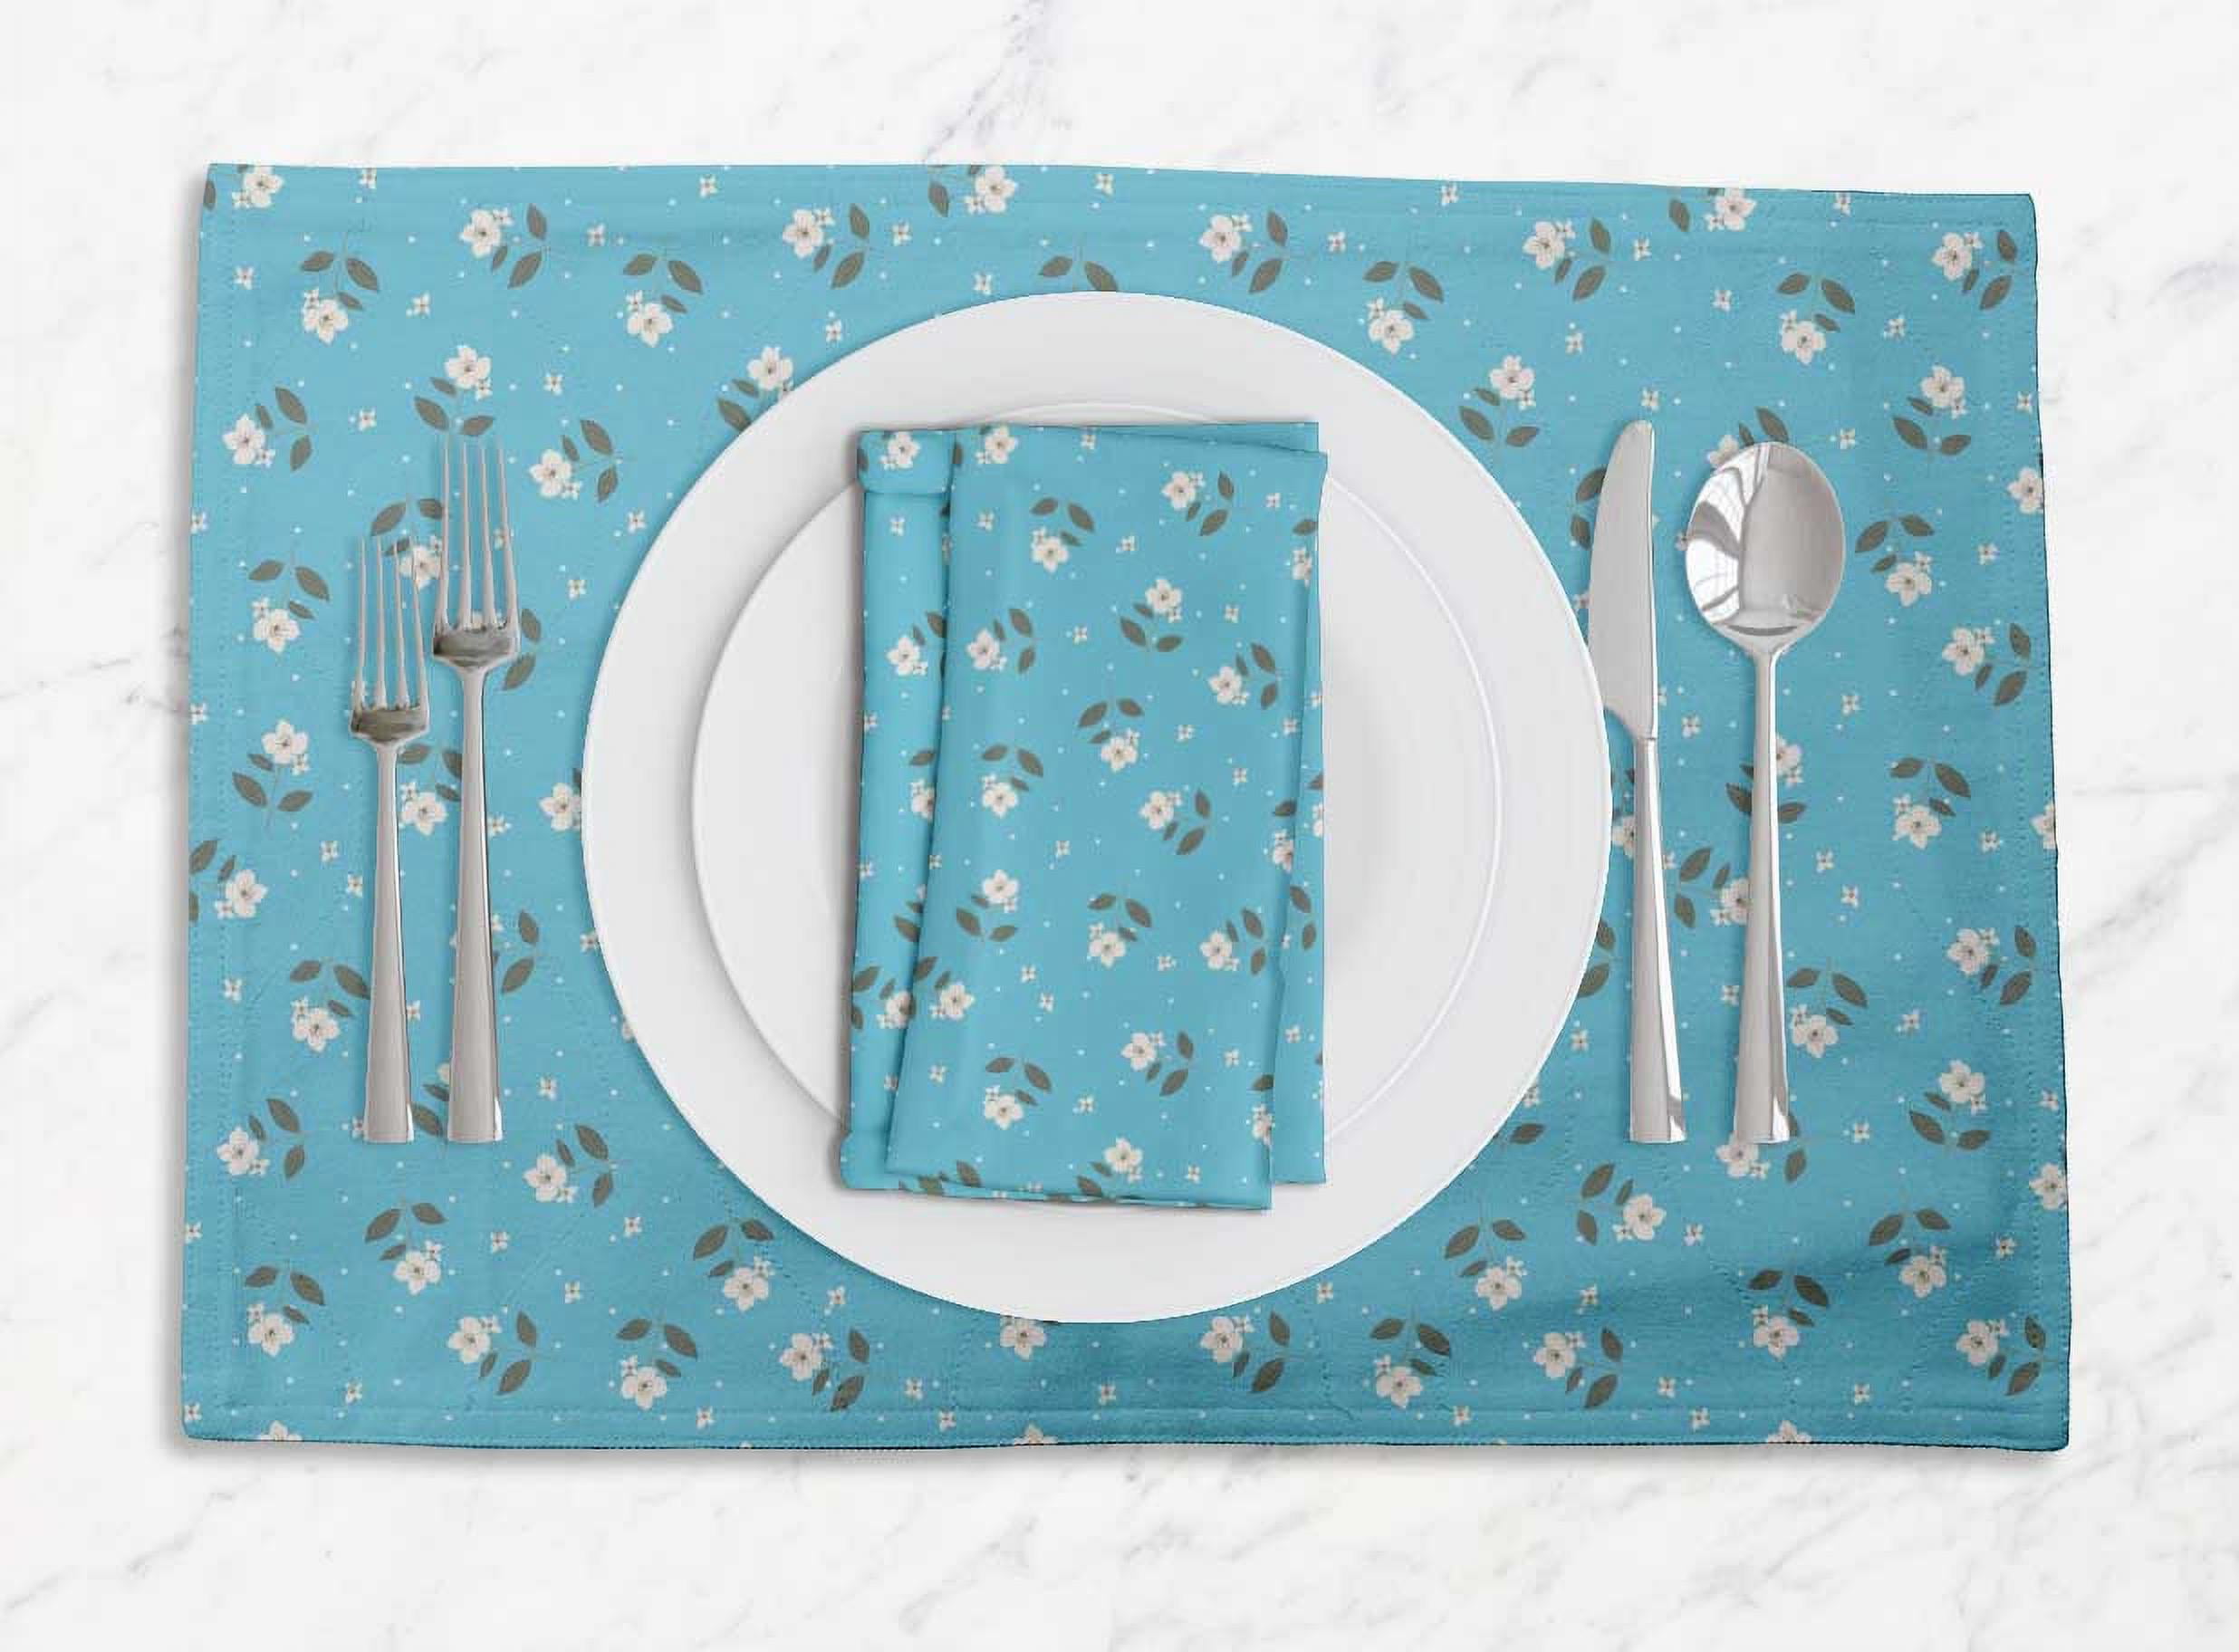 Details about   S4Sassy Dot & Cardamine Dining Room Tablemats With Napkins set-FL-931B 